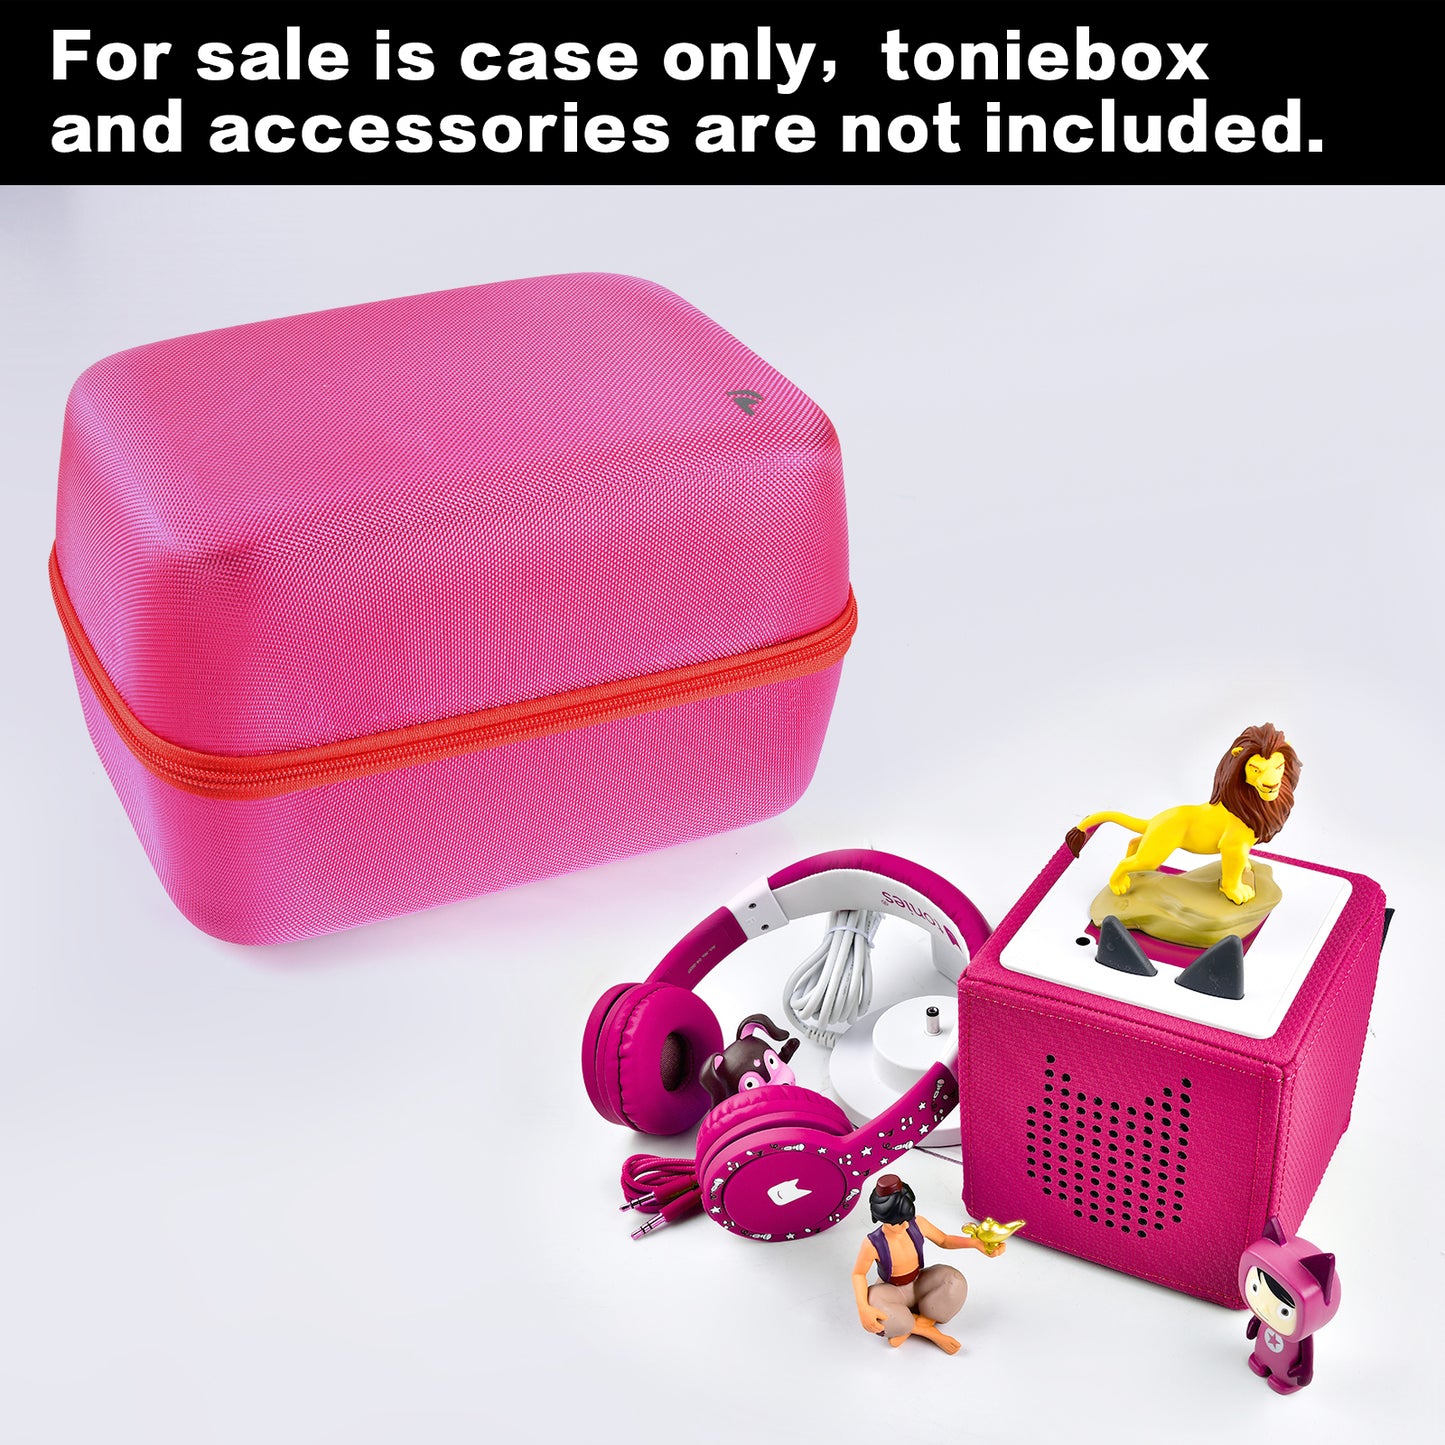 Case Compatible with Toniebox Starter Set and Tonies Figurine, Educational Musical Toy Storage Holder Organizer Fits for Charging Station, Headphones and More Accessories for Kids-Pink(Box Only)